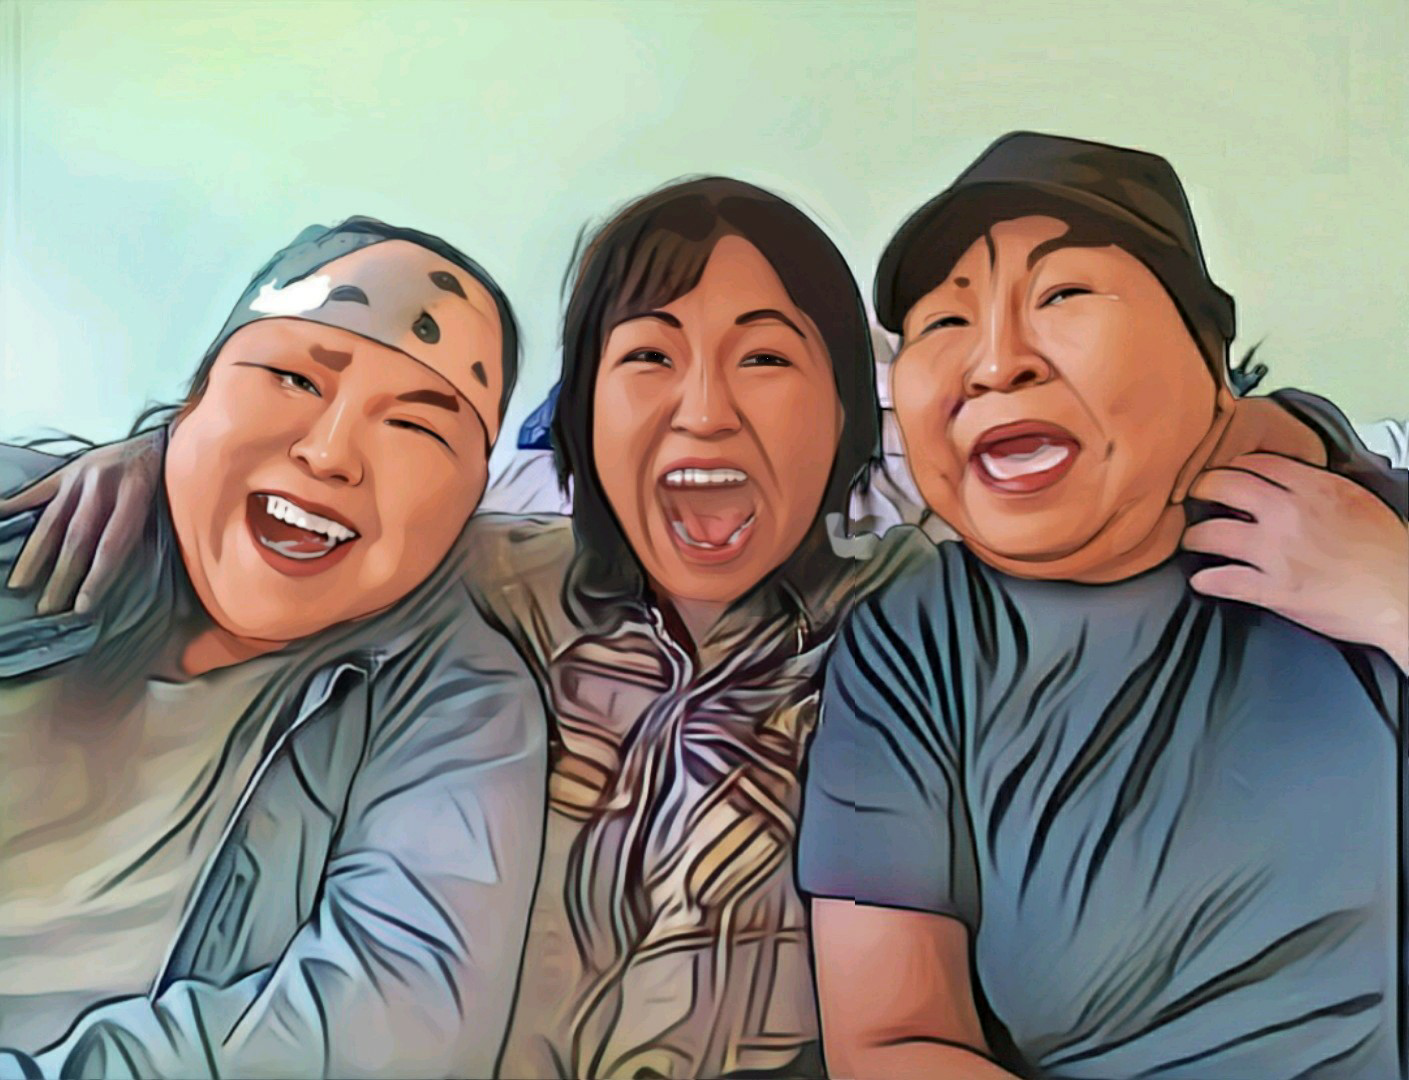 Three Inuit with their arms around each other sharing in laughter